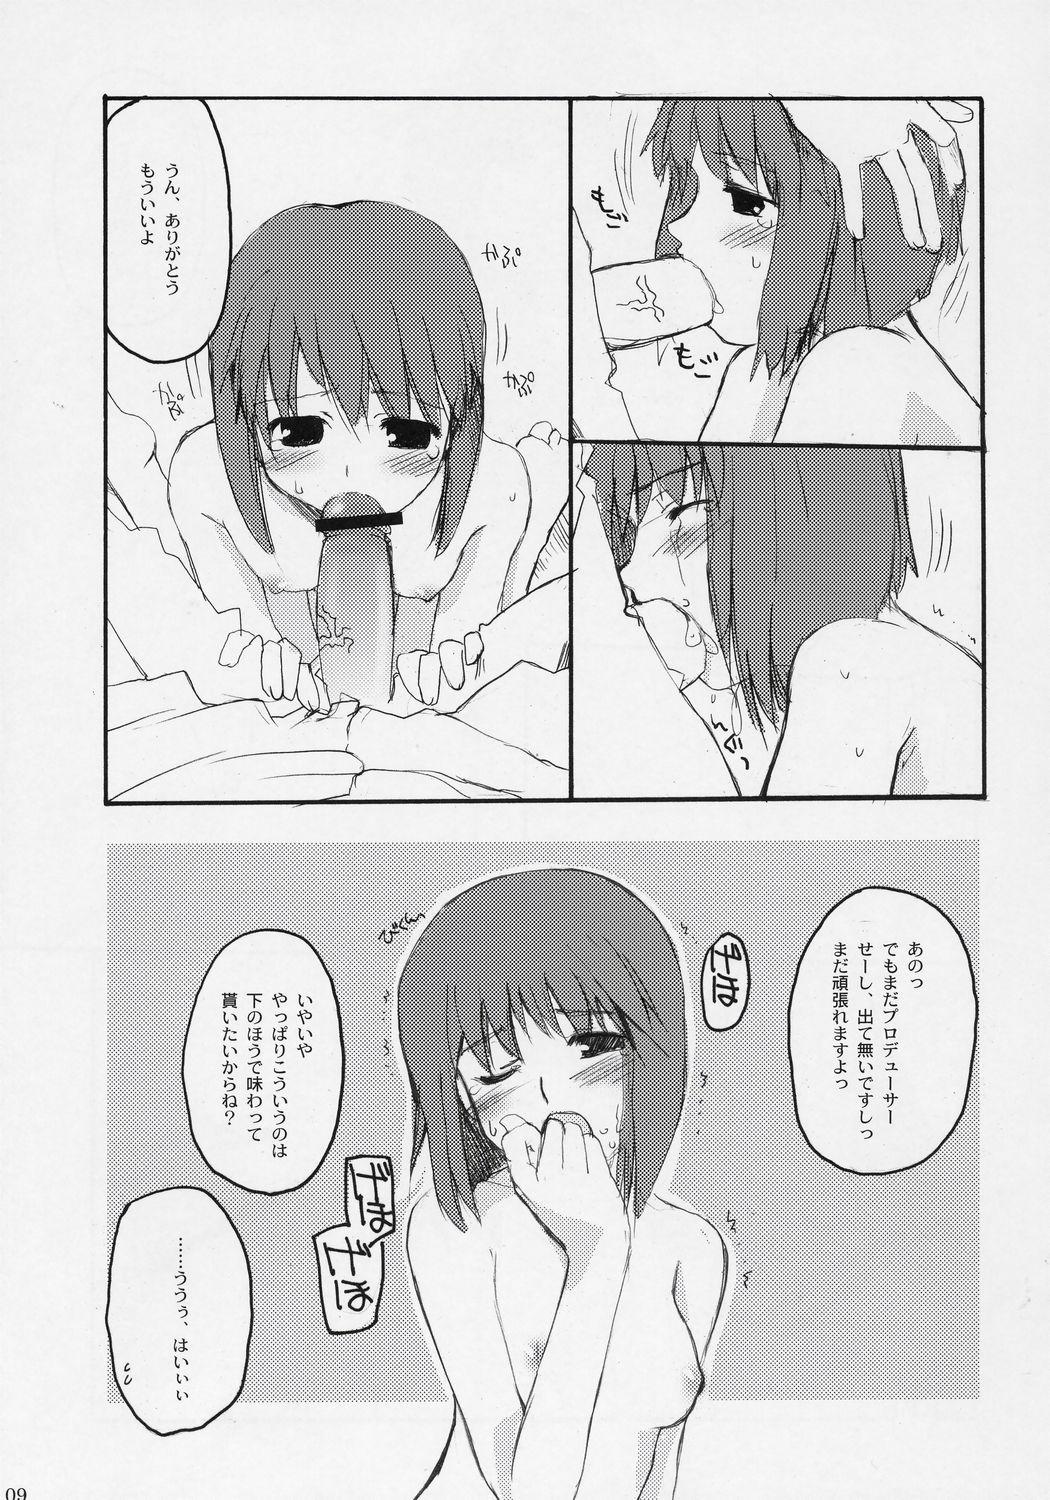 Skype the world don't need ANOTHER LOVER - The idolmaster Cornudo - Page 8